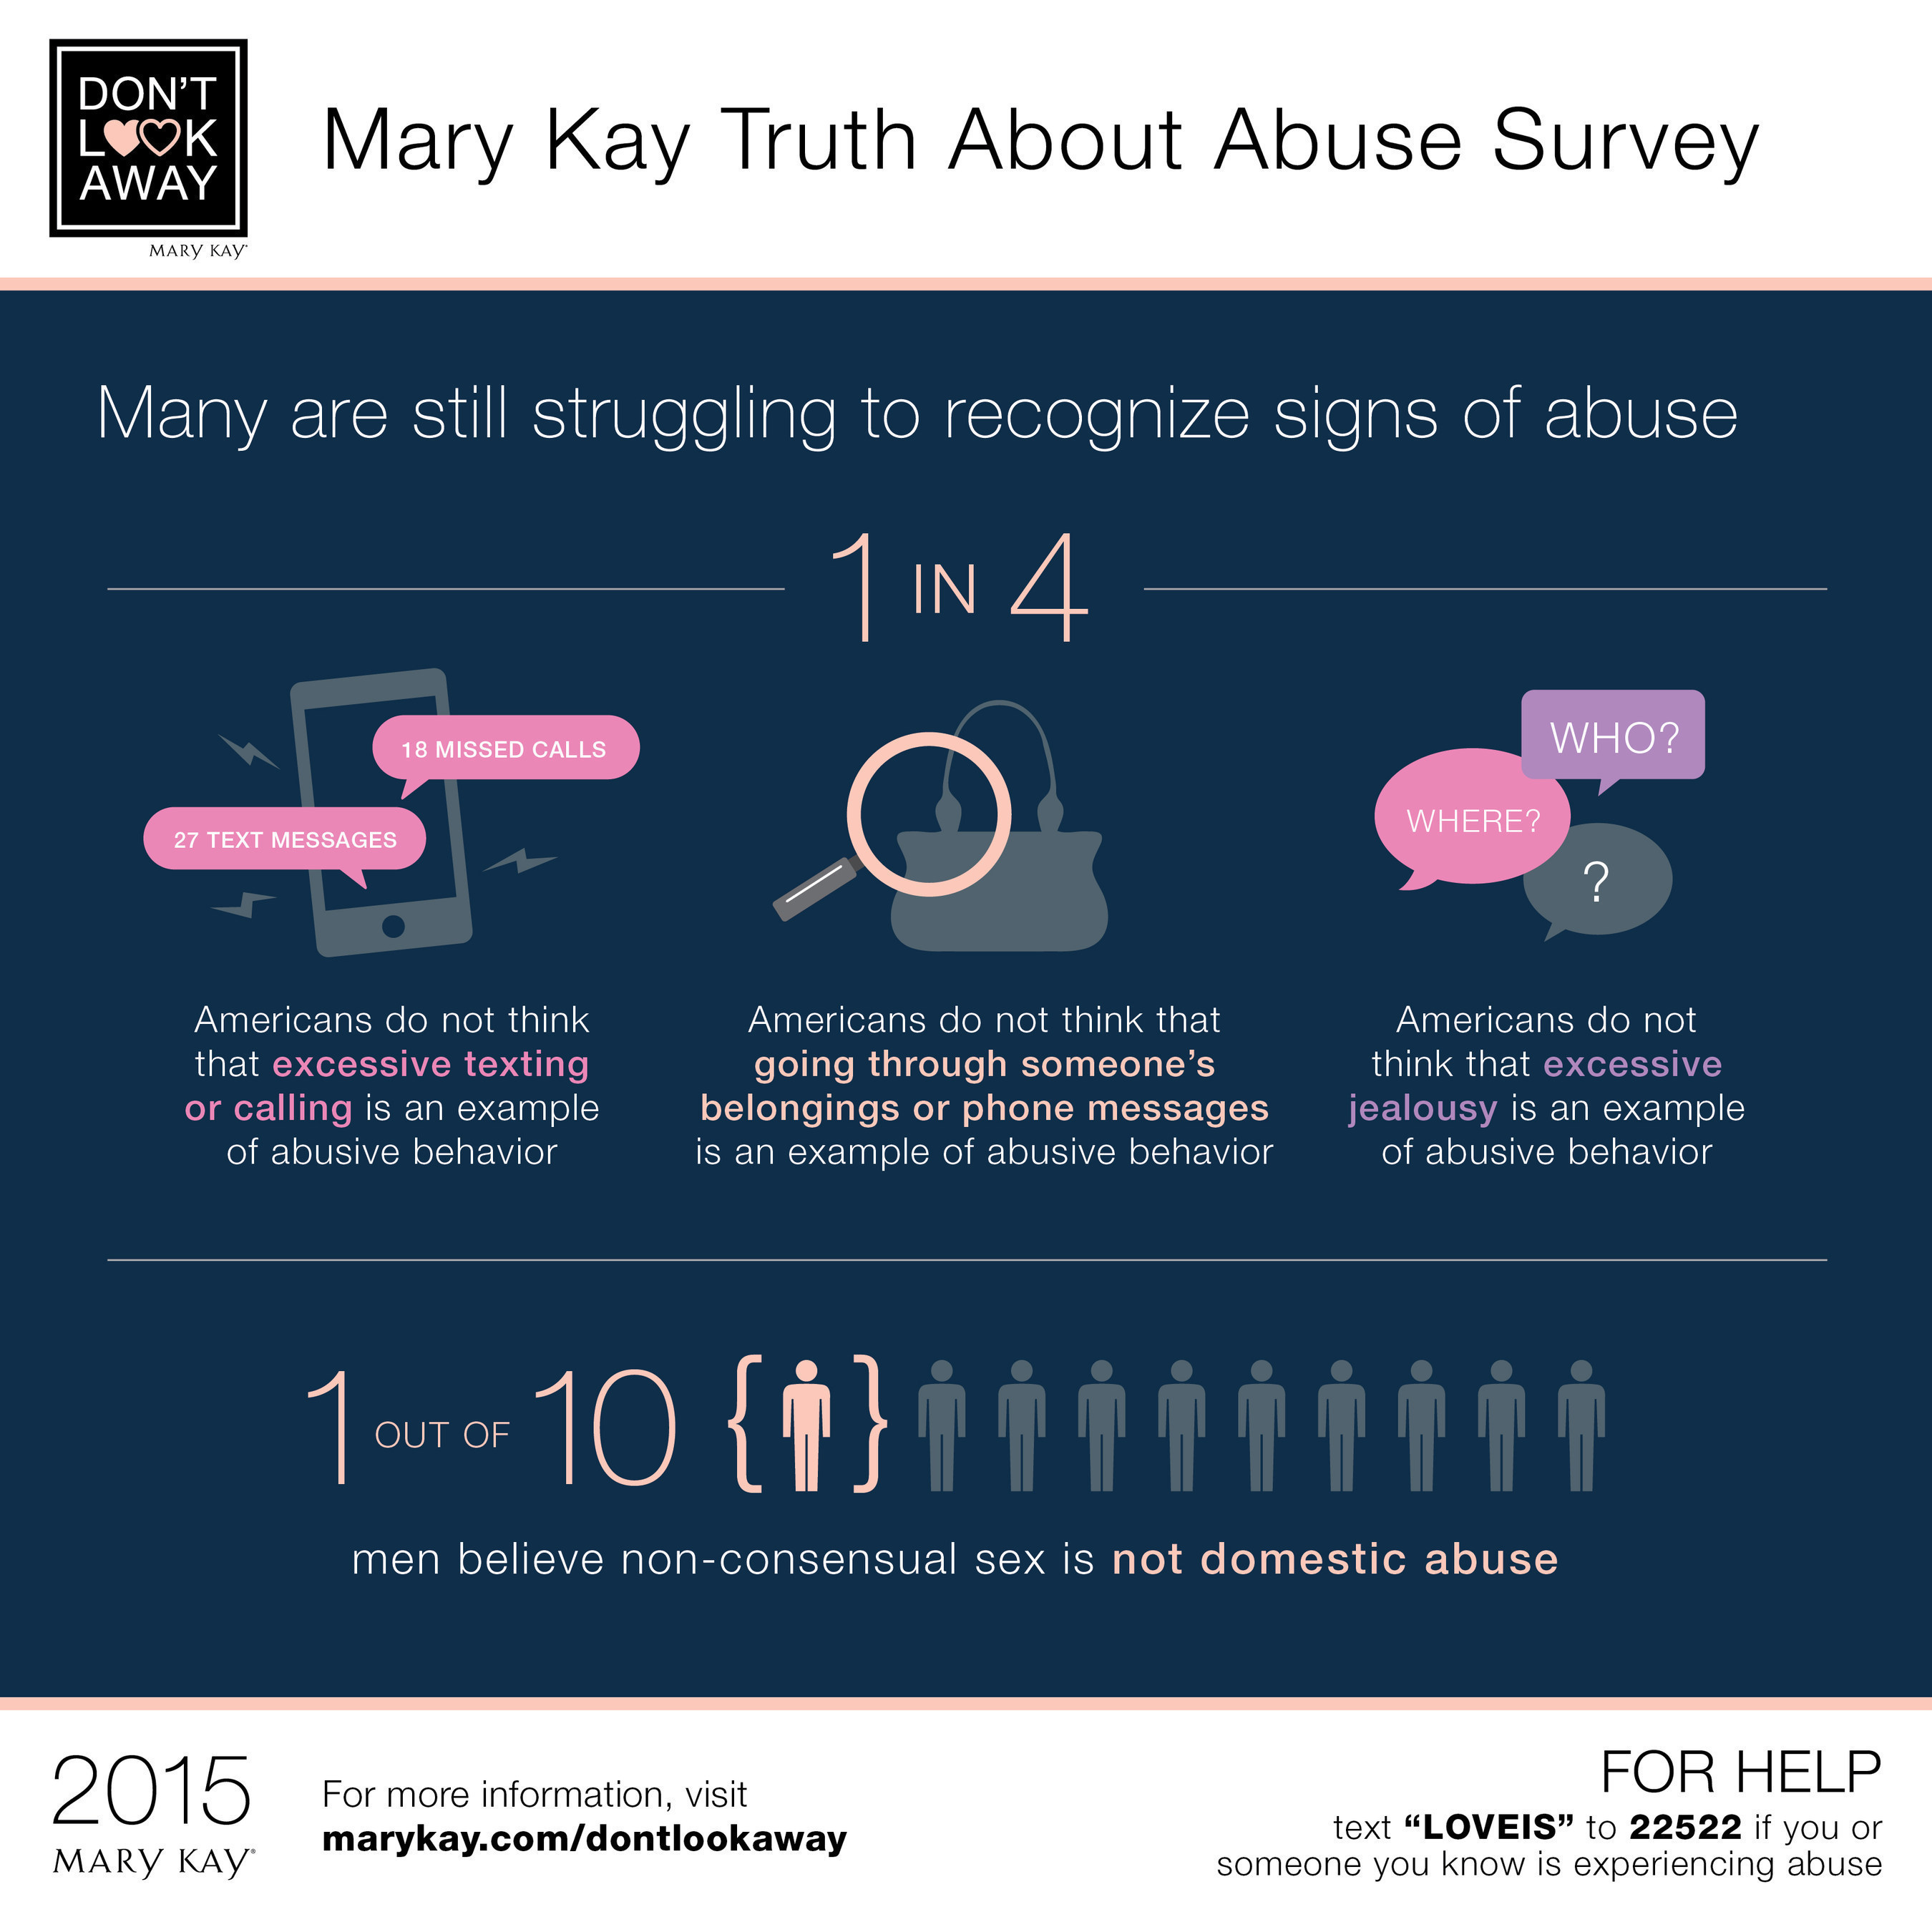 There is a critical need to recognize all forms of abuse. Mary Kay's Truth About Abuse survey reveals that Americans' awareness of domestic violence is on the rise, but that many still do not recognize signs of abuse. One thousand men and women nationwide participated in the online survey Sept. 3-11, 2015, sharing their insights and stories on the issue of domestic violence.